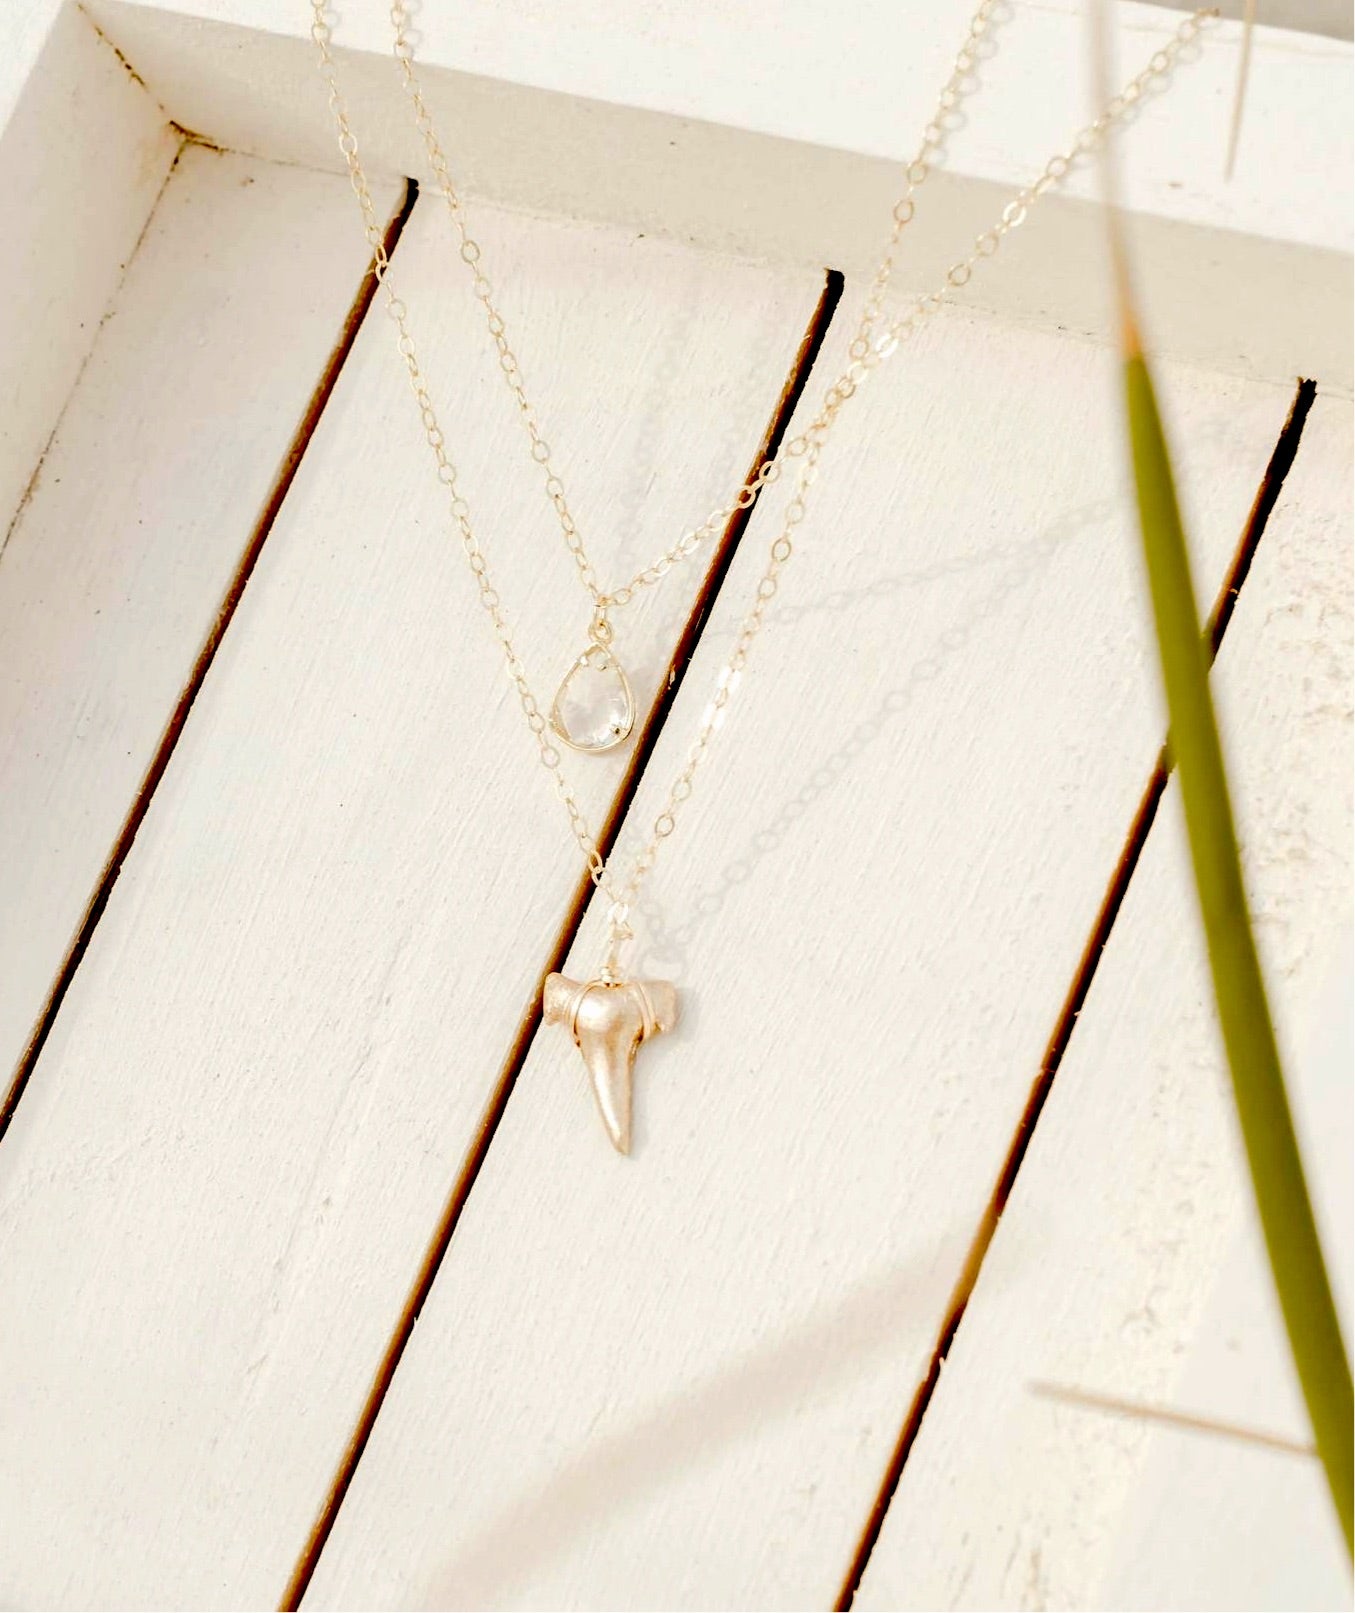 2 layer gold shark tooth necklace with quartz crystal